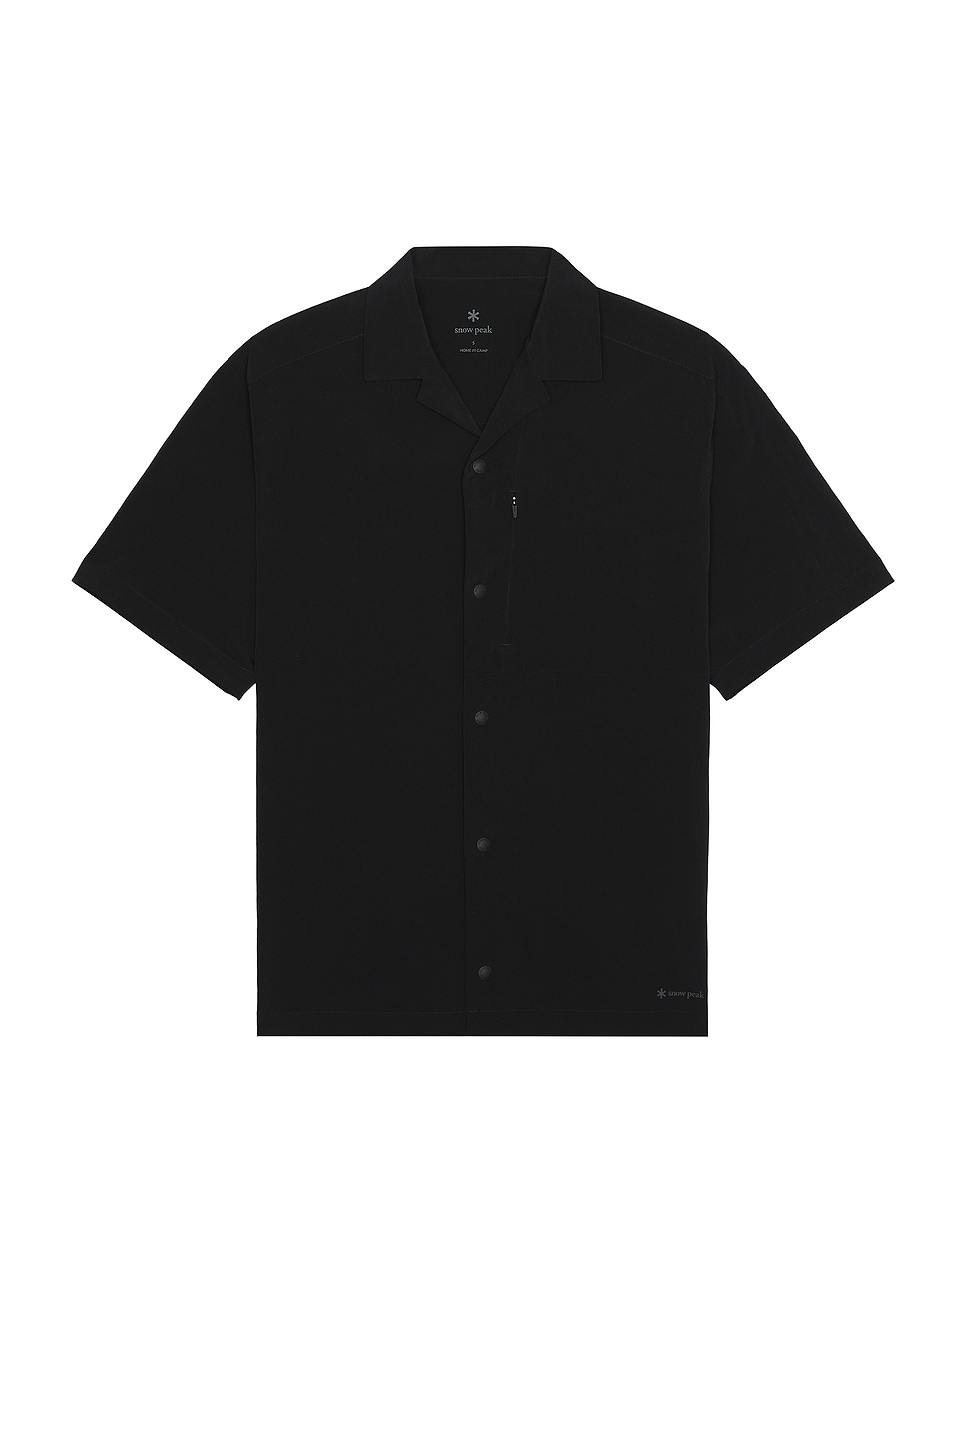 Image 1 of Snow Peak Breathable Quick Dry Shirt in Black